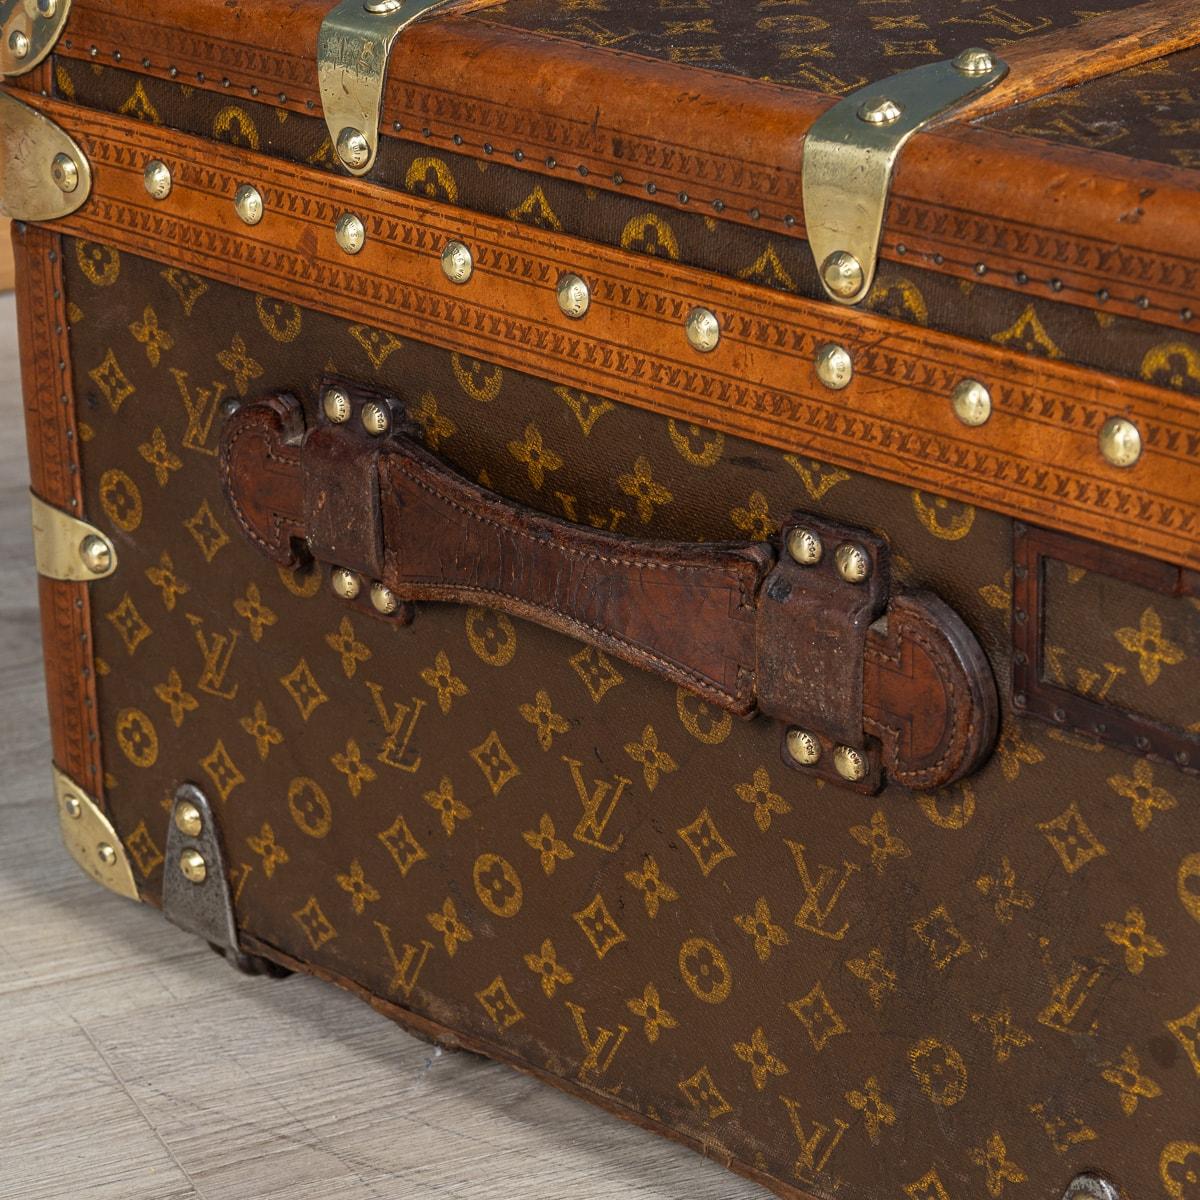 20th Century Louis Vuitton Cabin Trunk In Monogram Canvas, France c.1930 For Sale 10